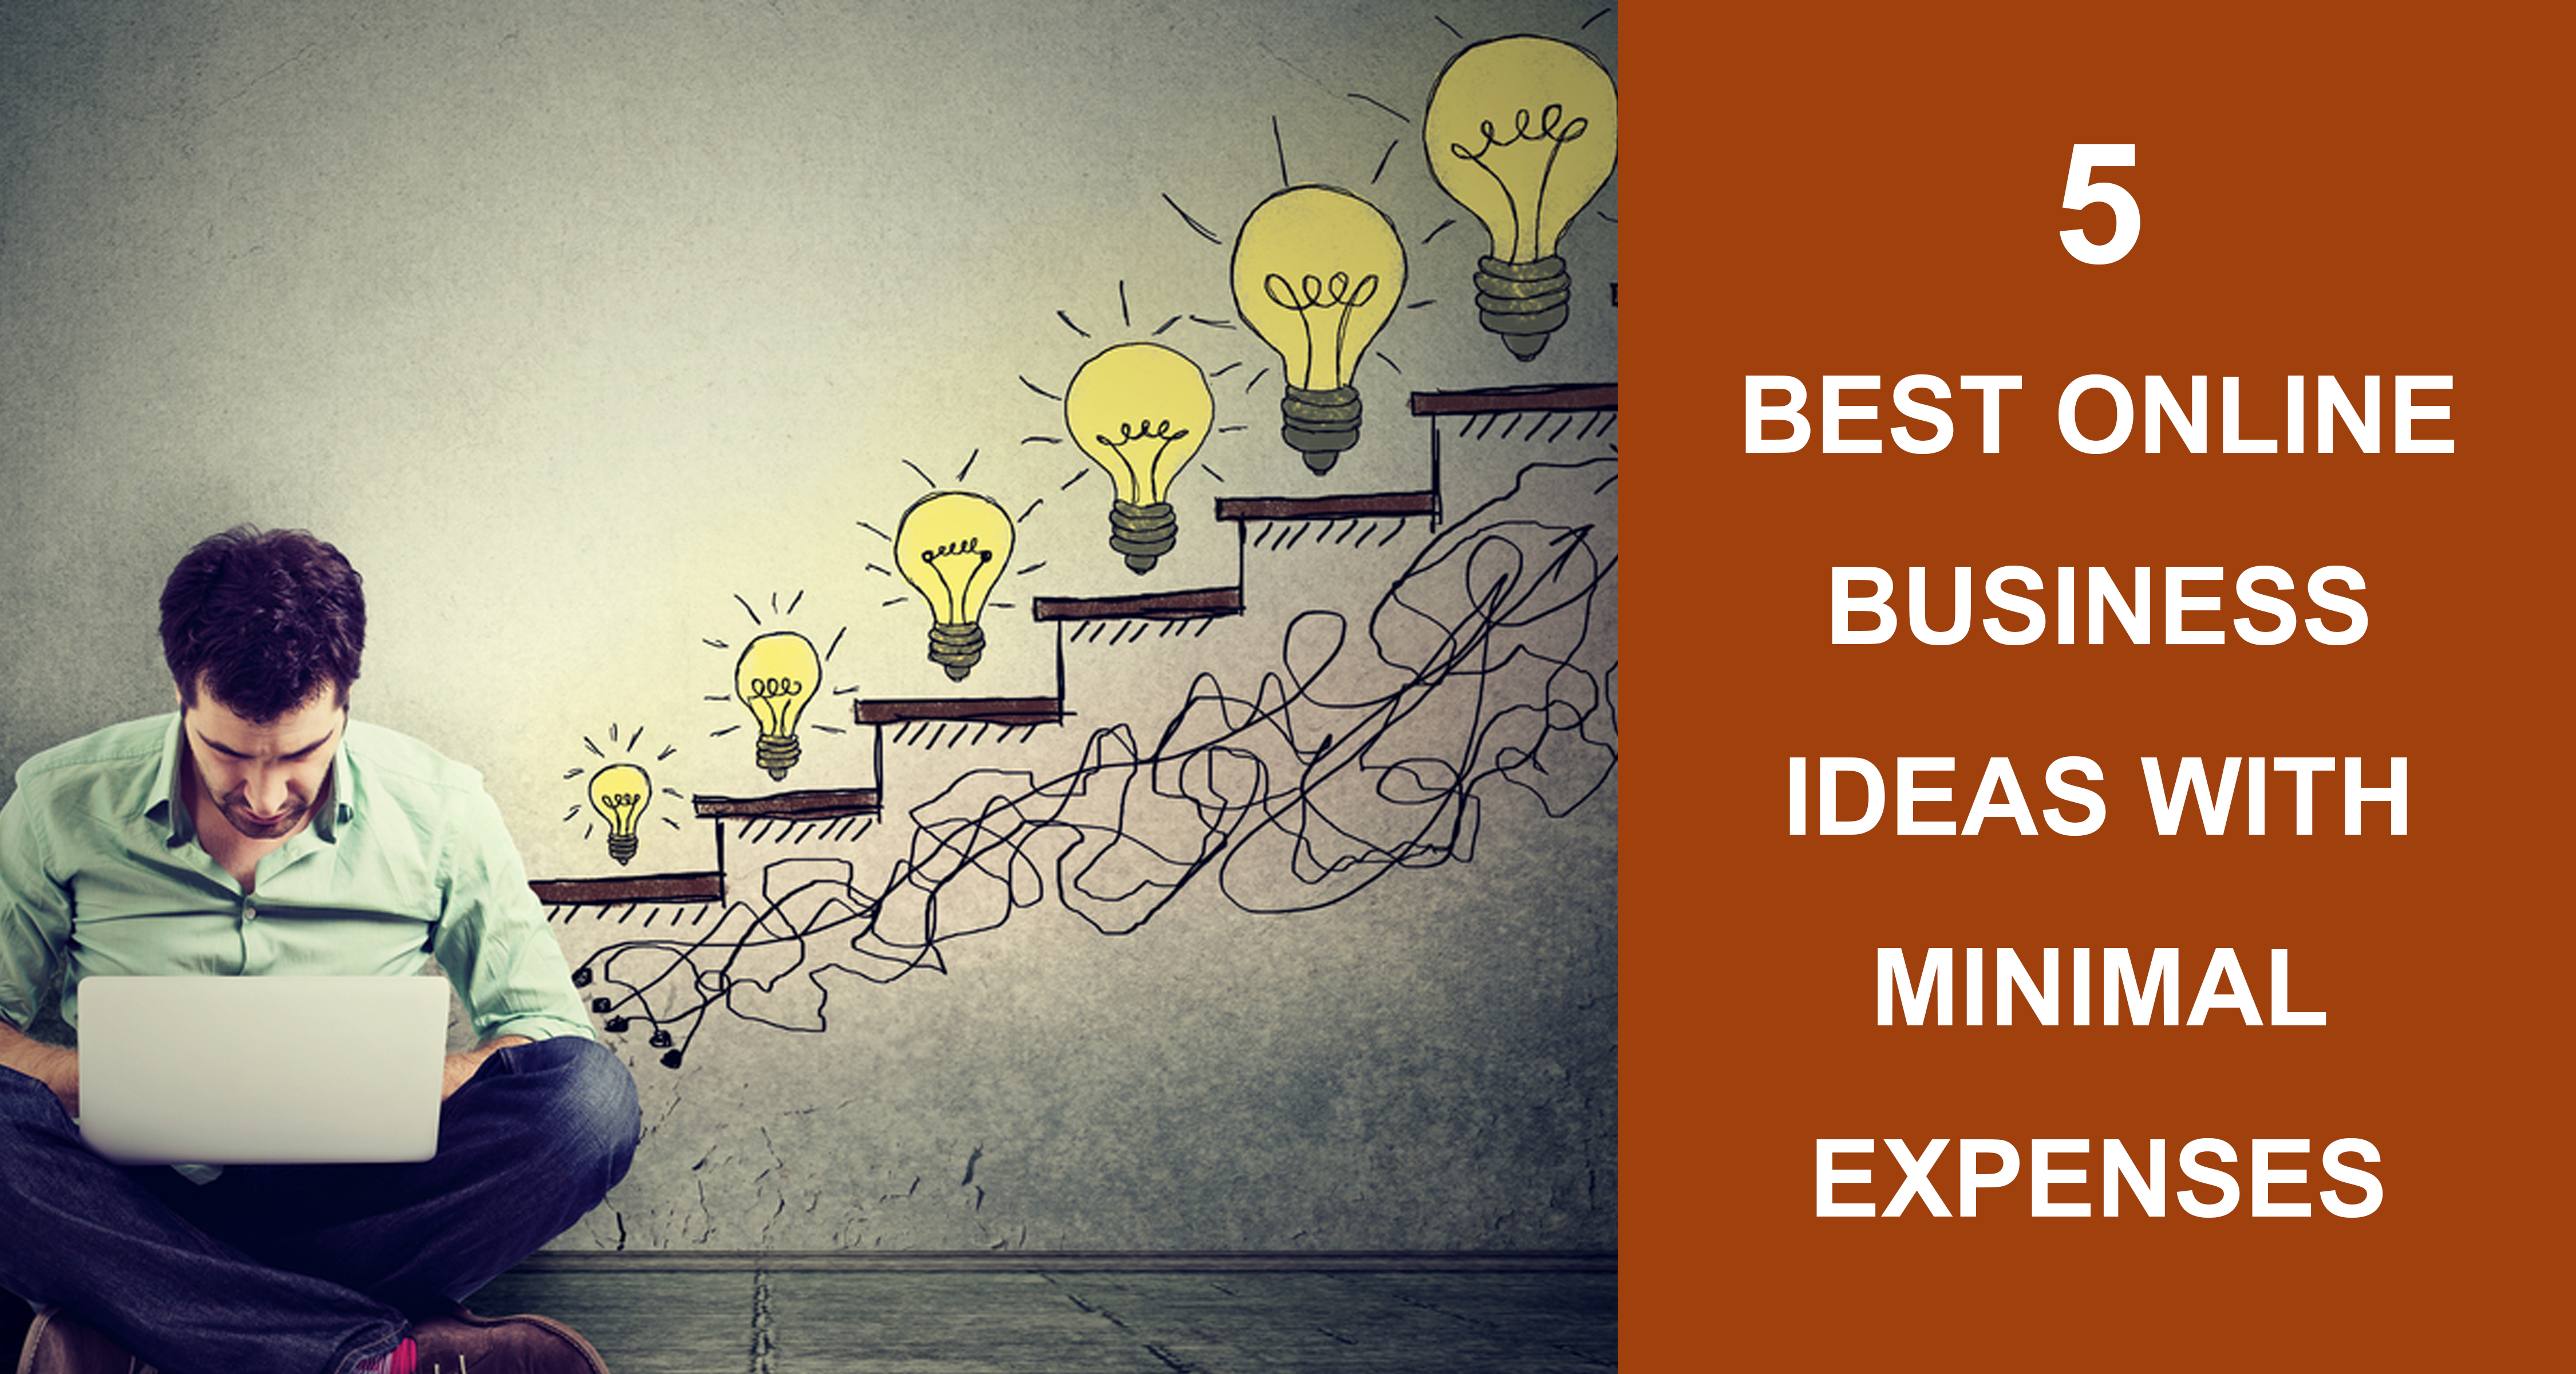 Best Online Business Ideas With No Or Very Minimal Expenses in 2019